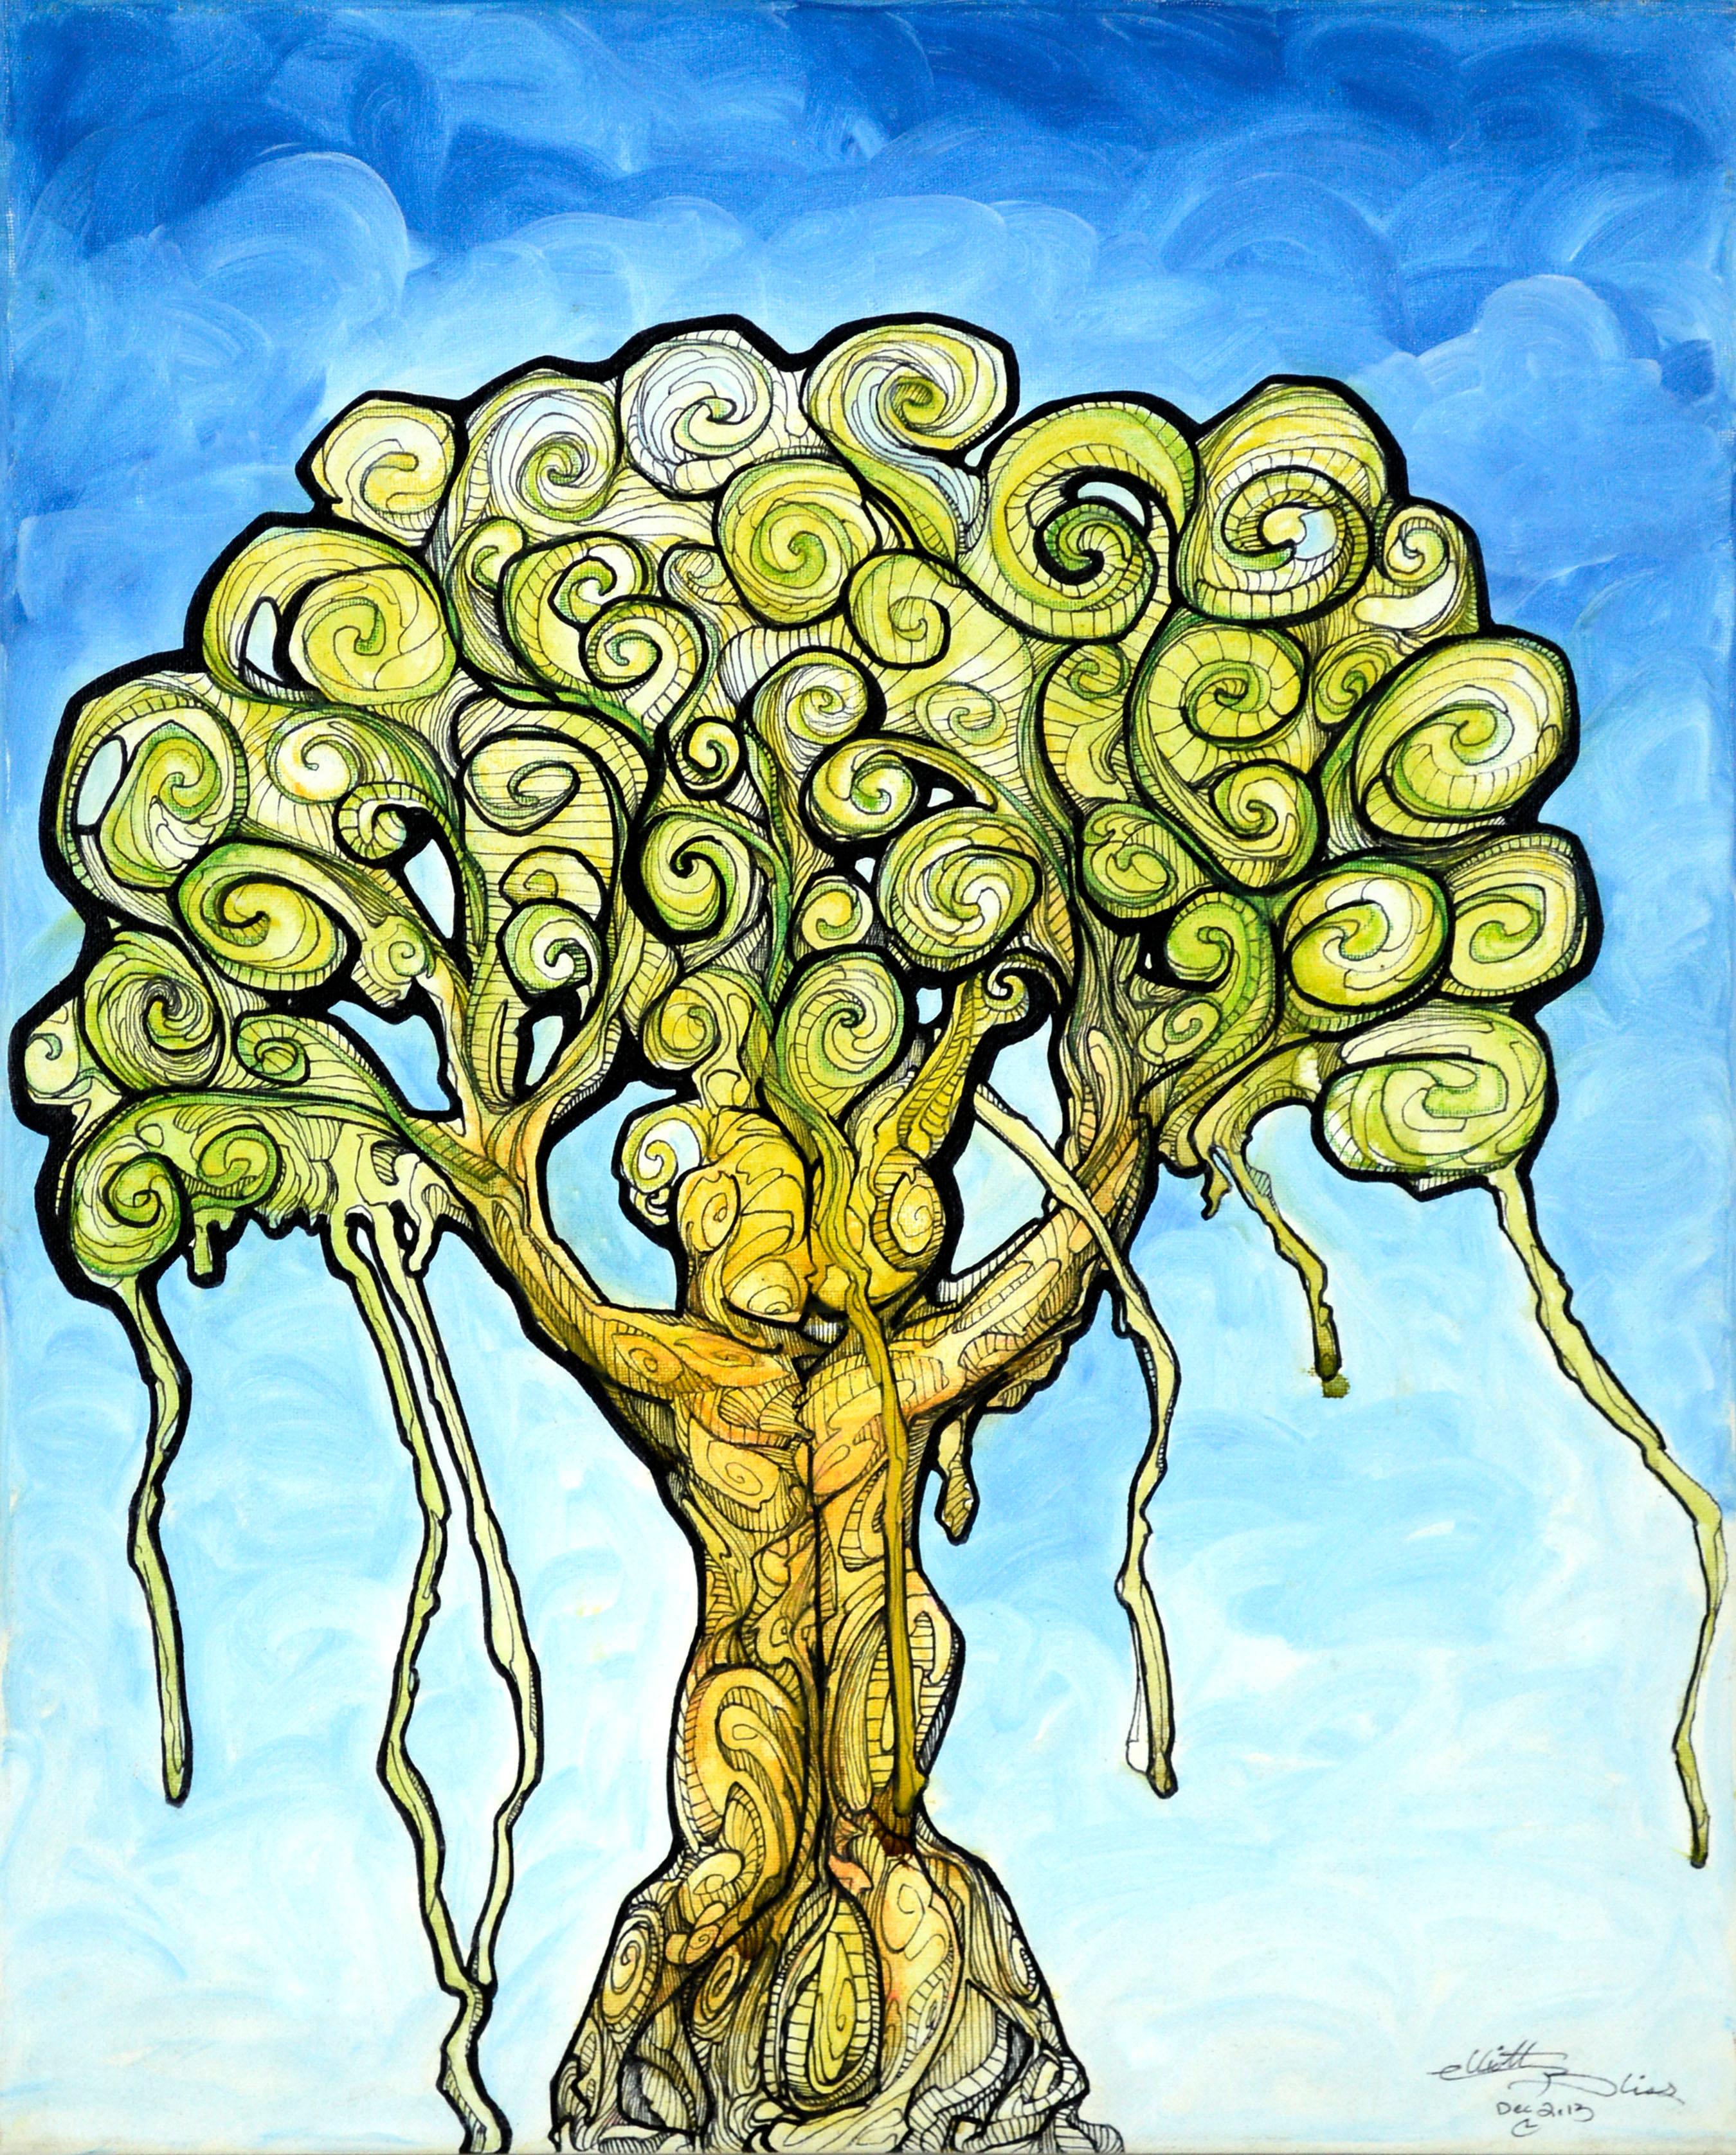 Tree People Embrace, Contemporary Visionary Figurative Abstract